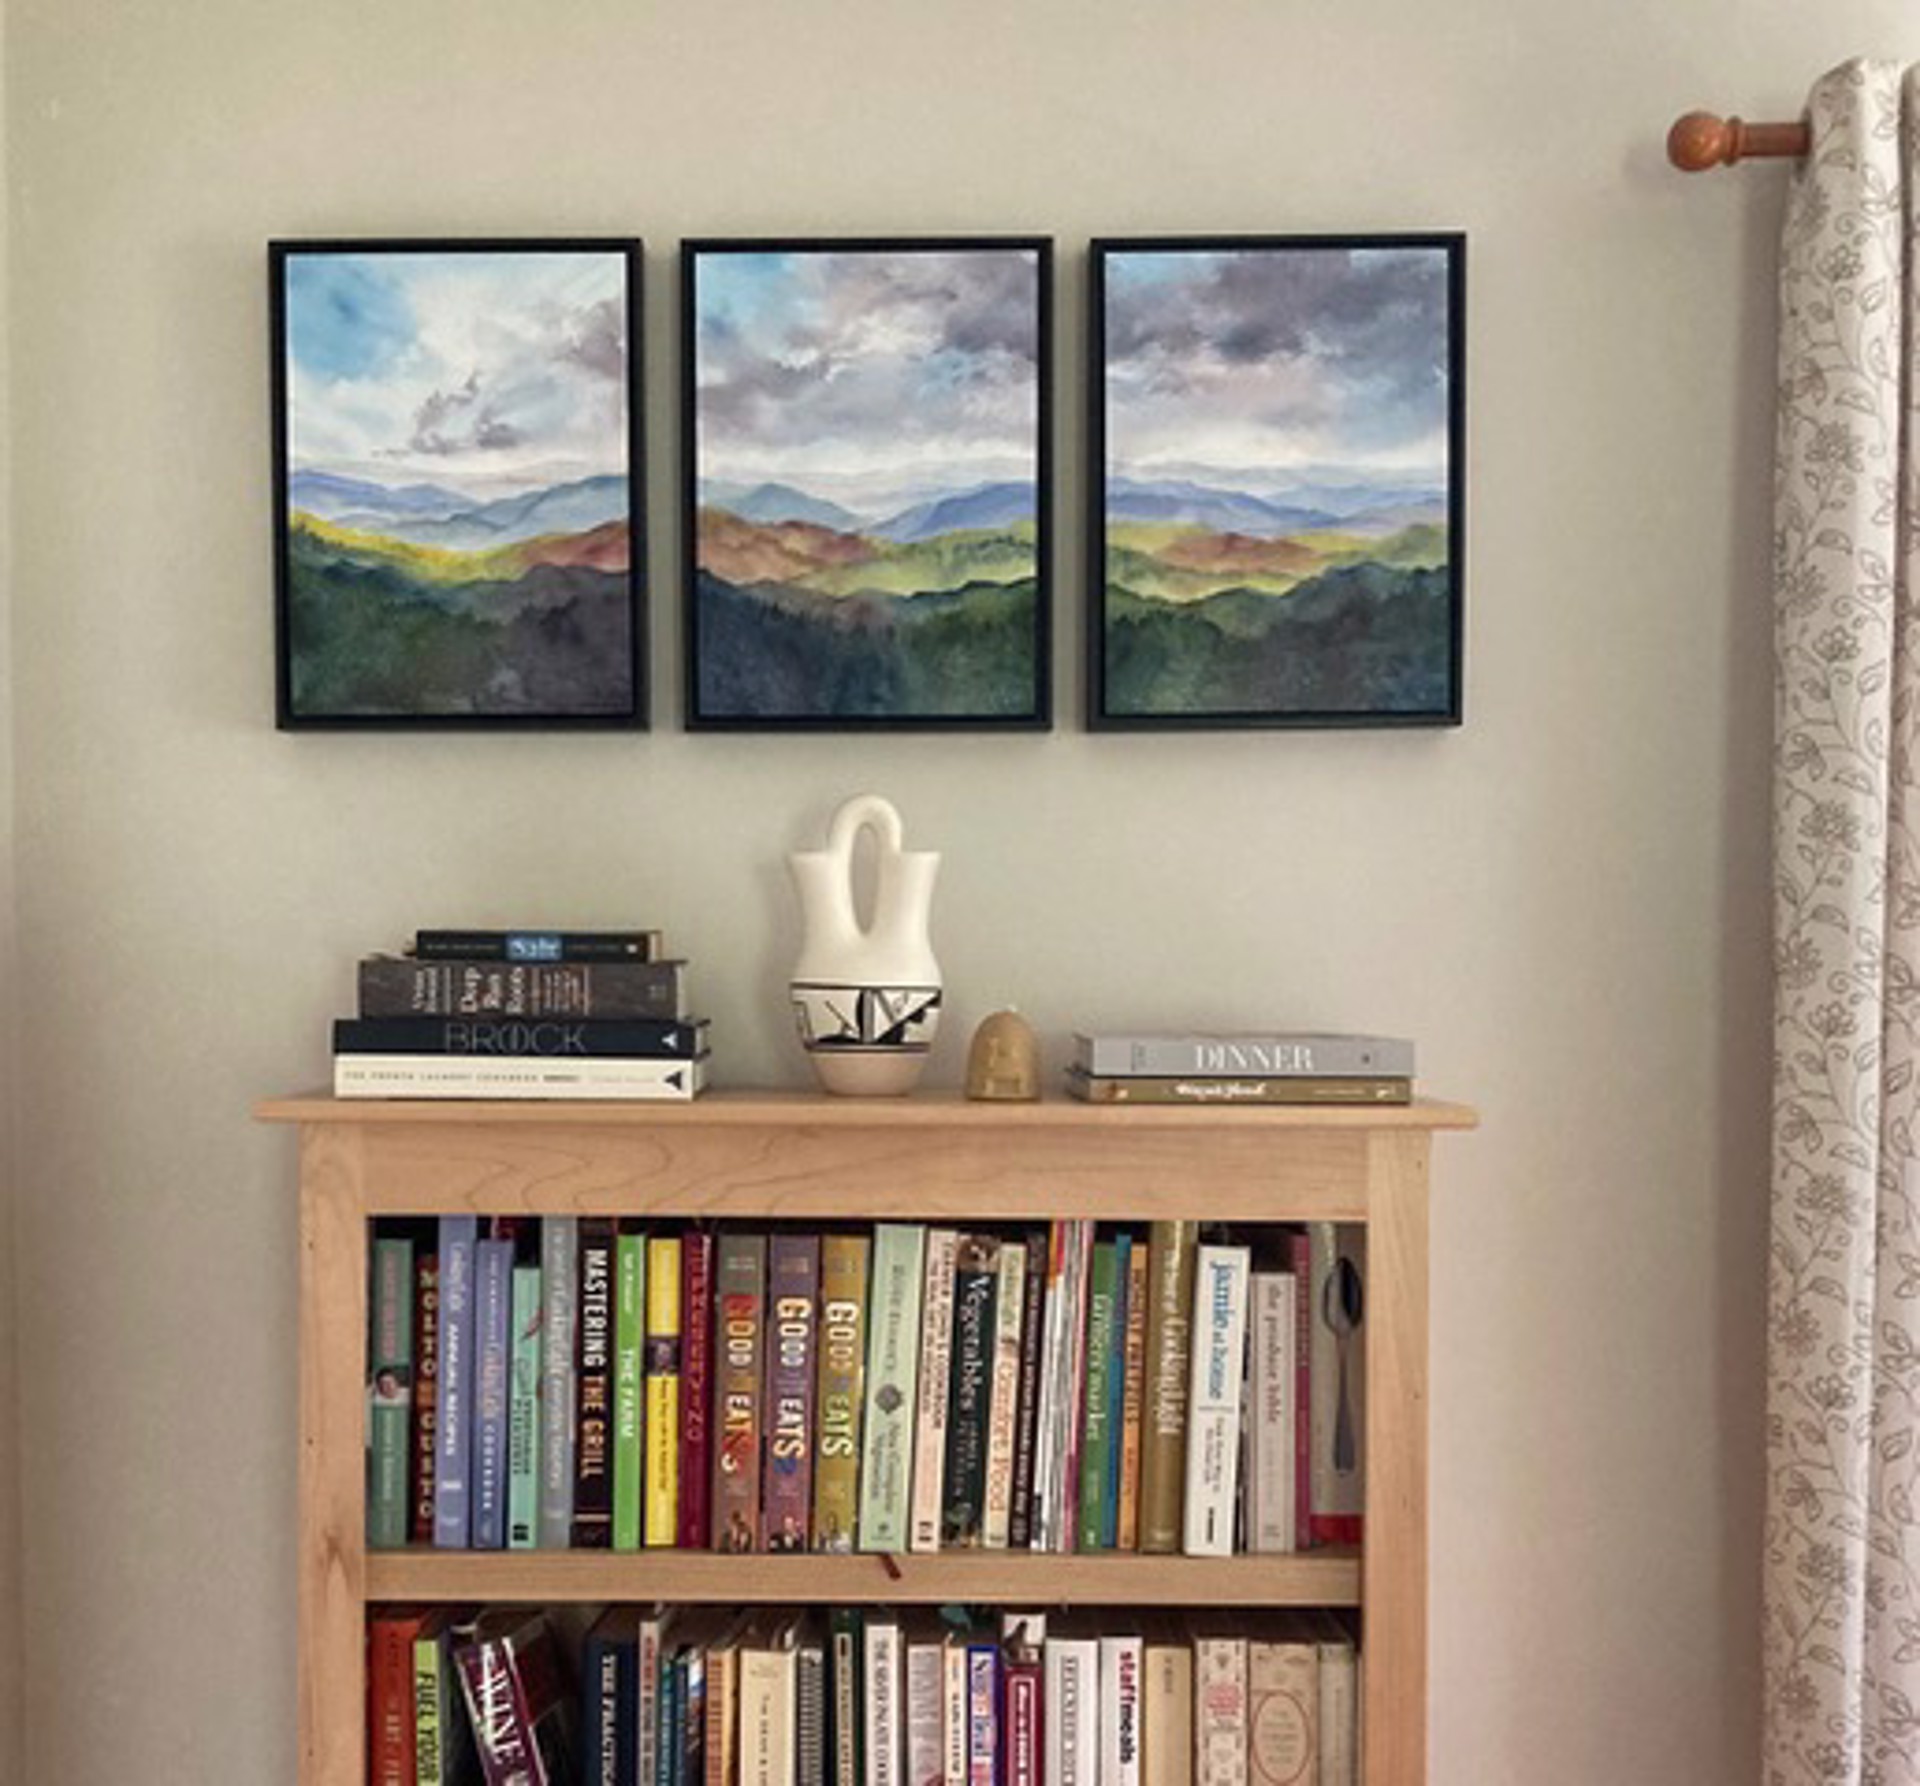 The Long View, Triptych by Bronwen McCormick